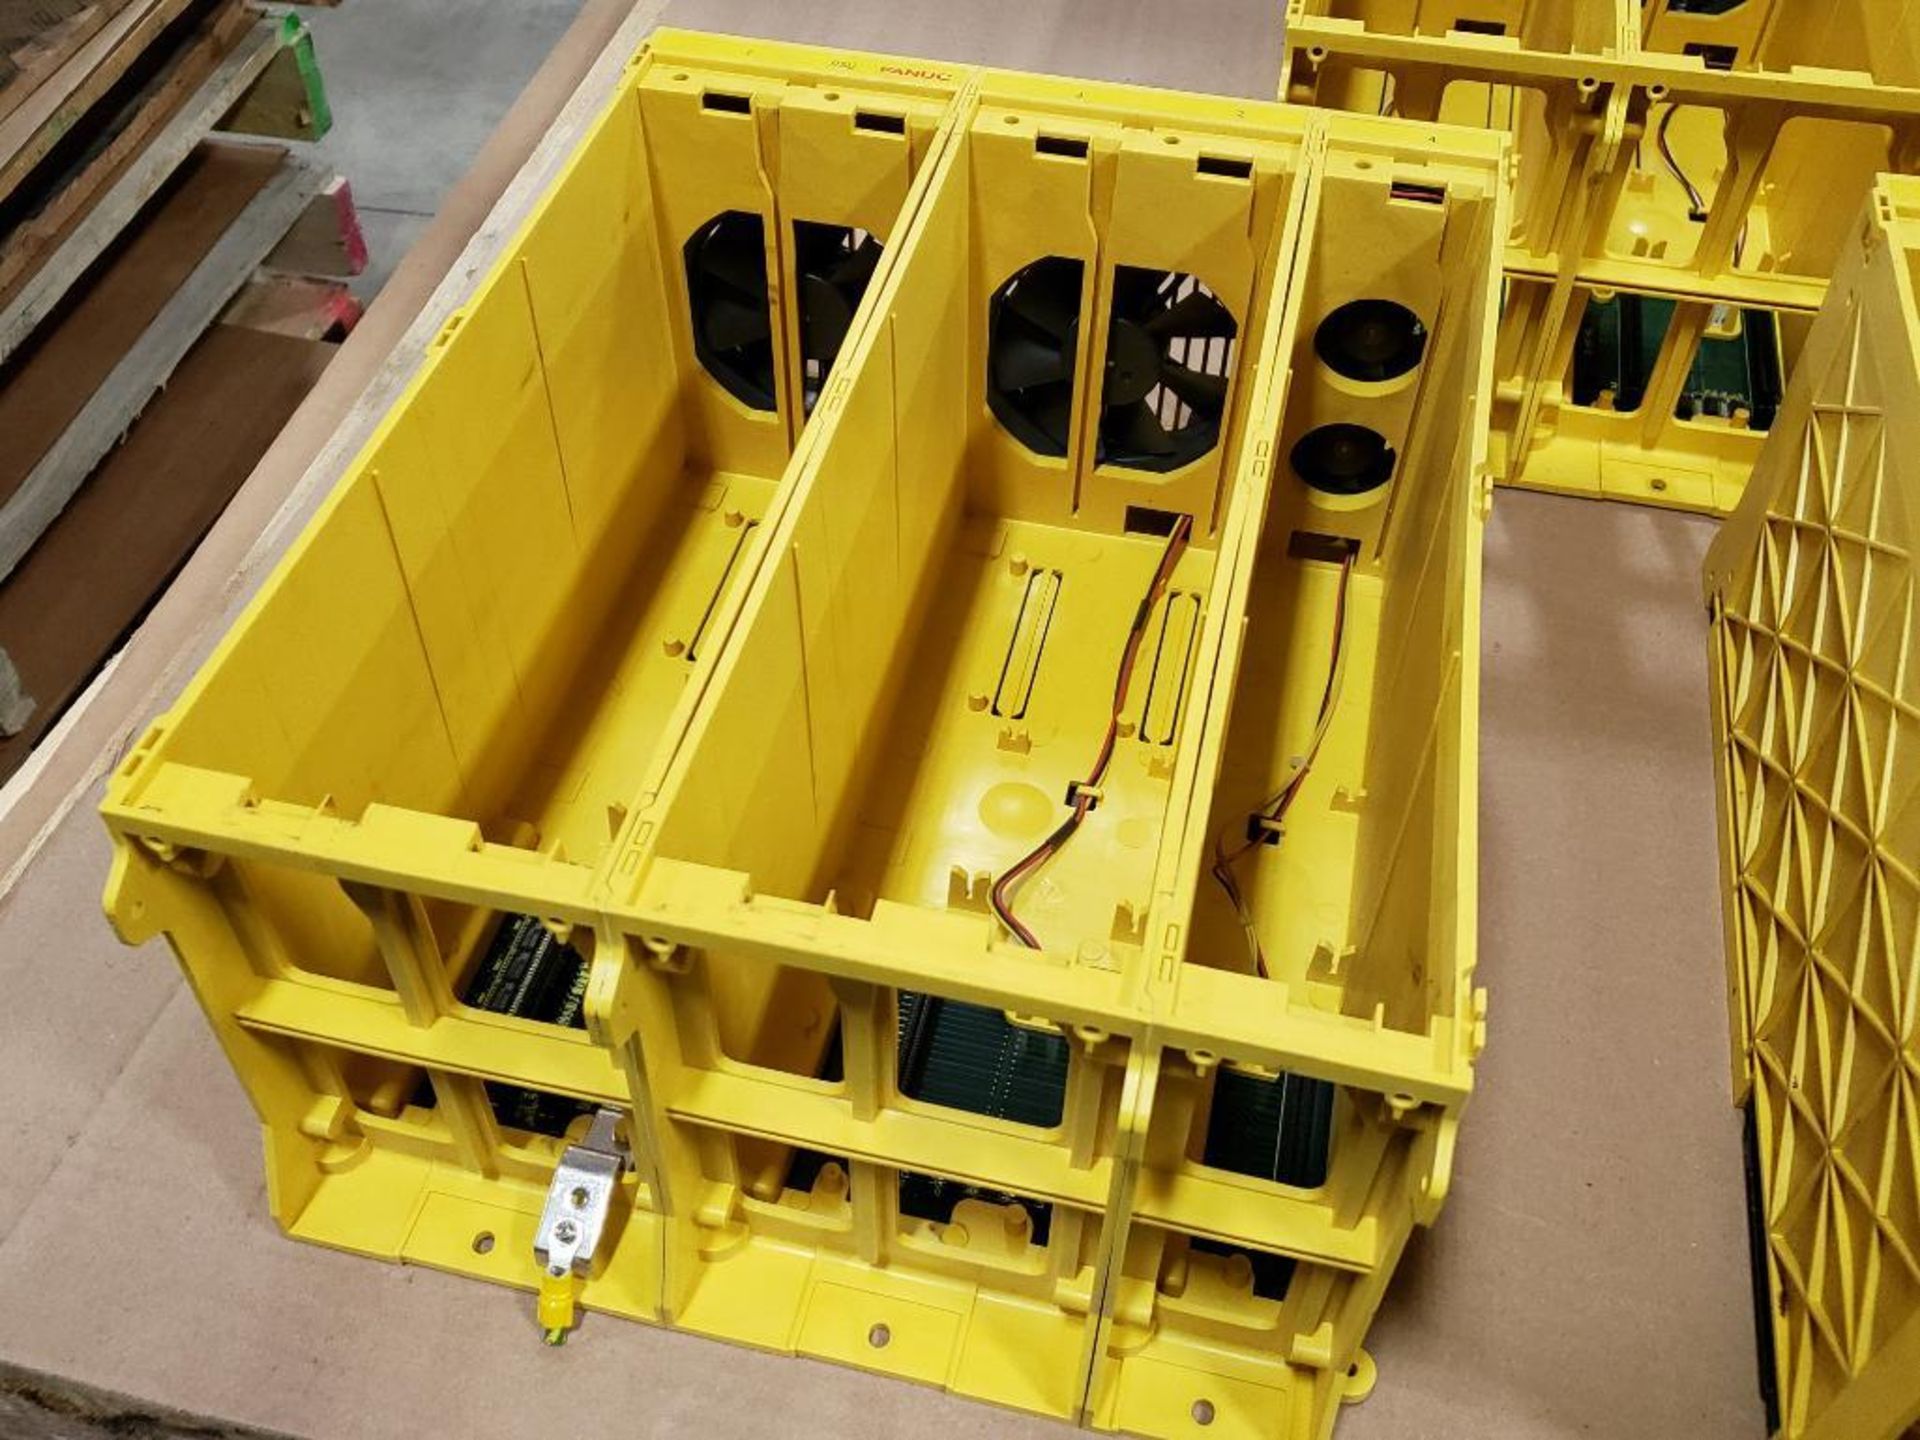 Qty 3 - Fanuc backplane. Part number A05B-2316-C111. - Image 2 of 10